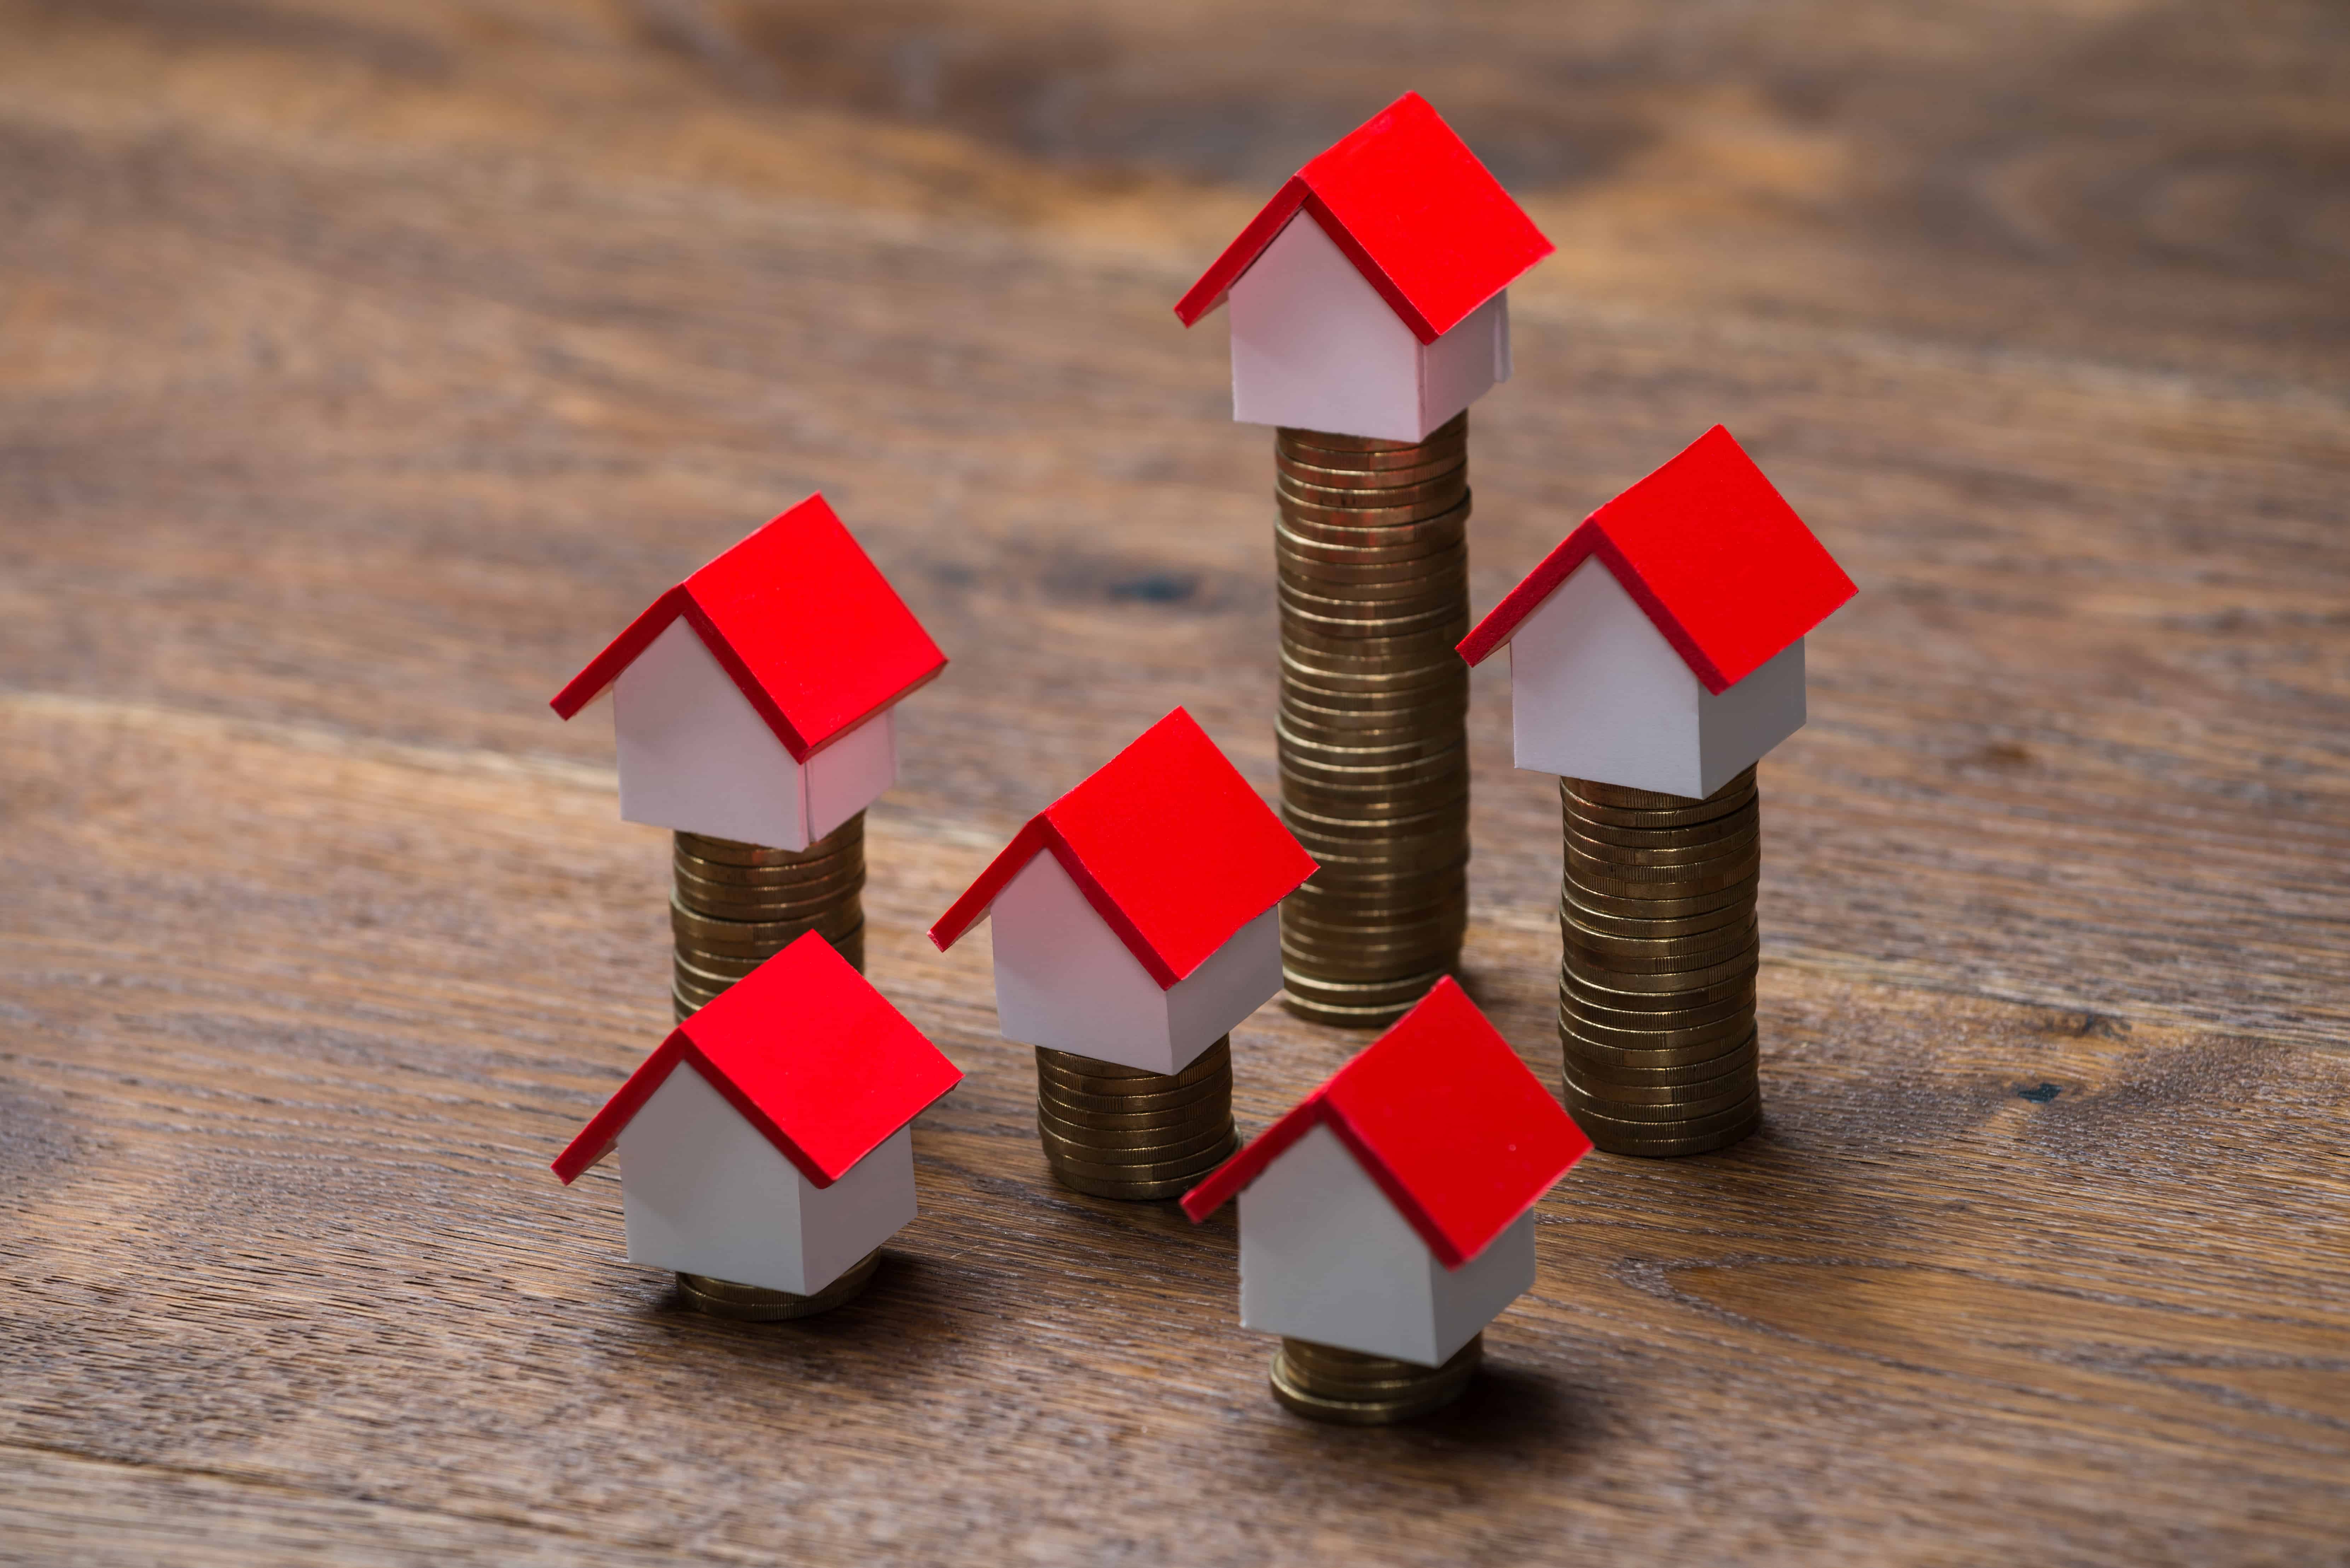 UK Finance: House purchase lending surged in Q1